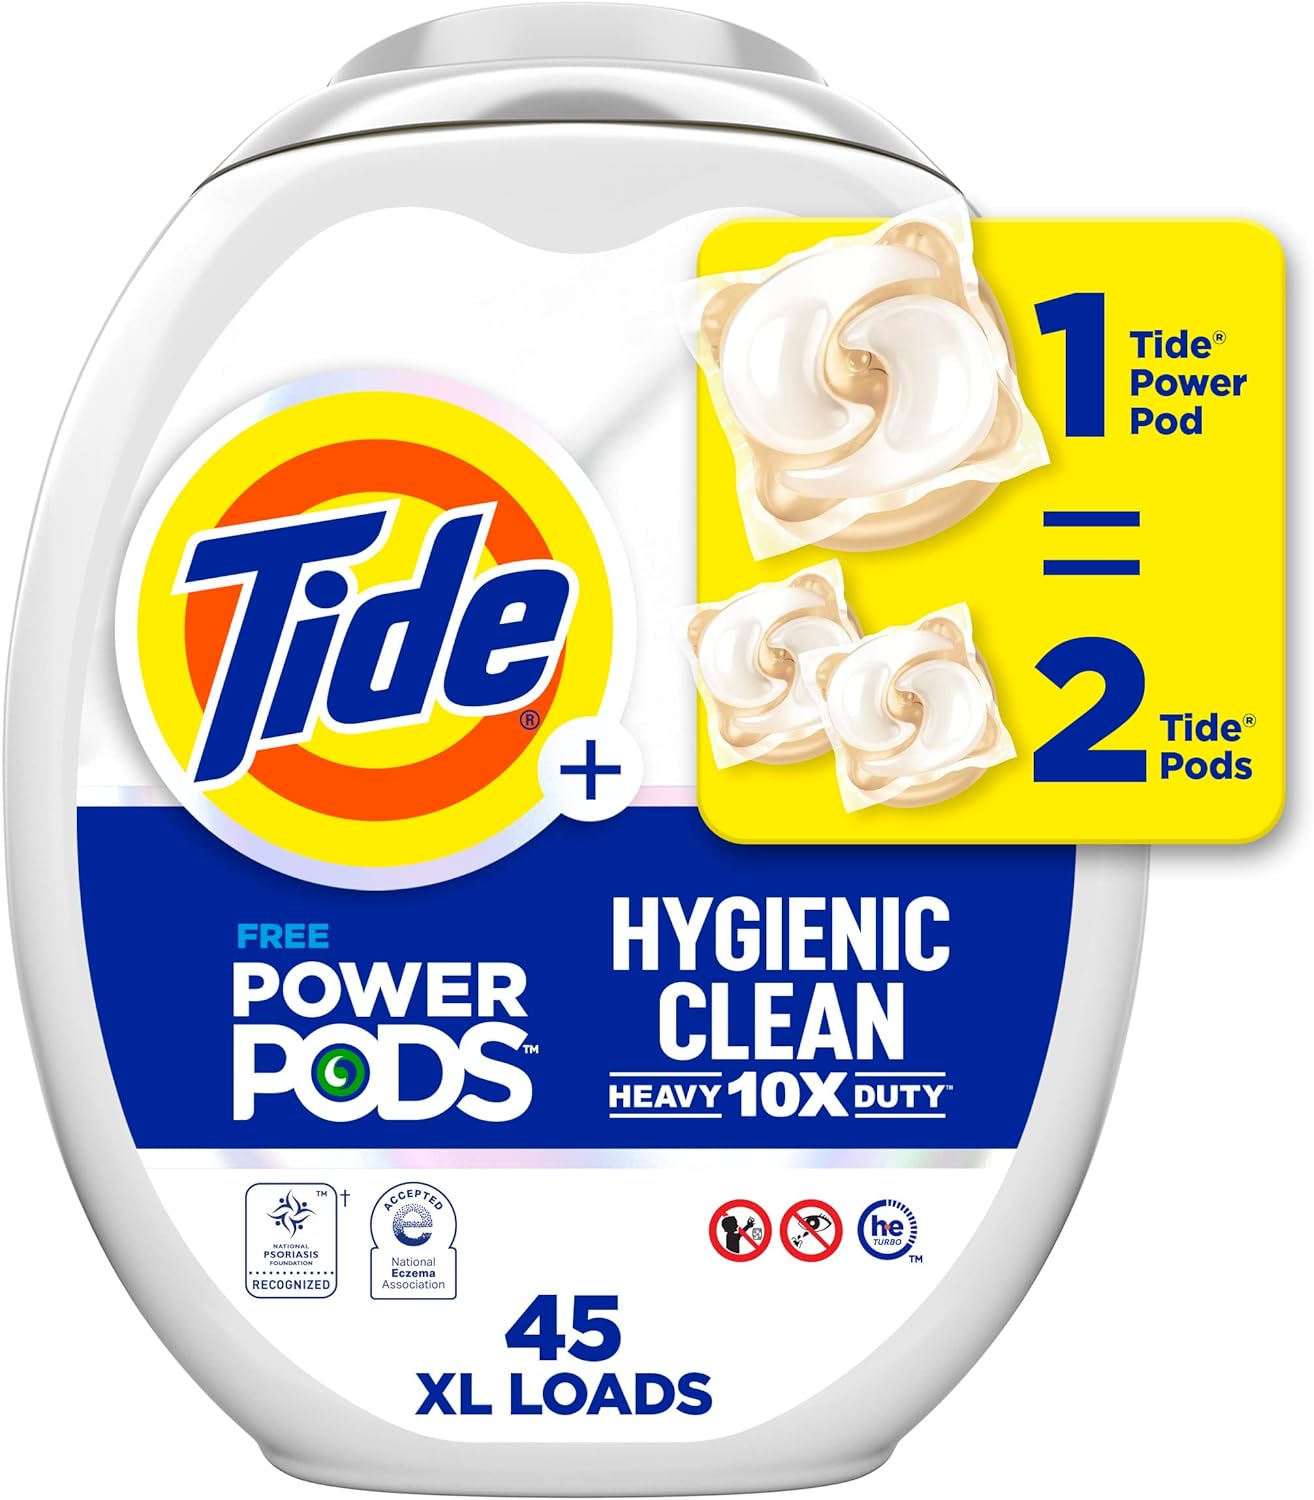 45-Count Tide POWER Pods Laundry Detergent Pacs (various) + $0.99 Amazon Credit $15 w/ S&S + Free Shipping w/ Prime or on $35+